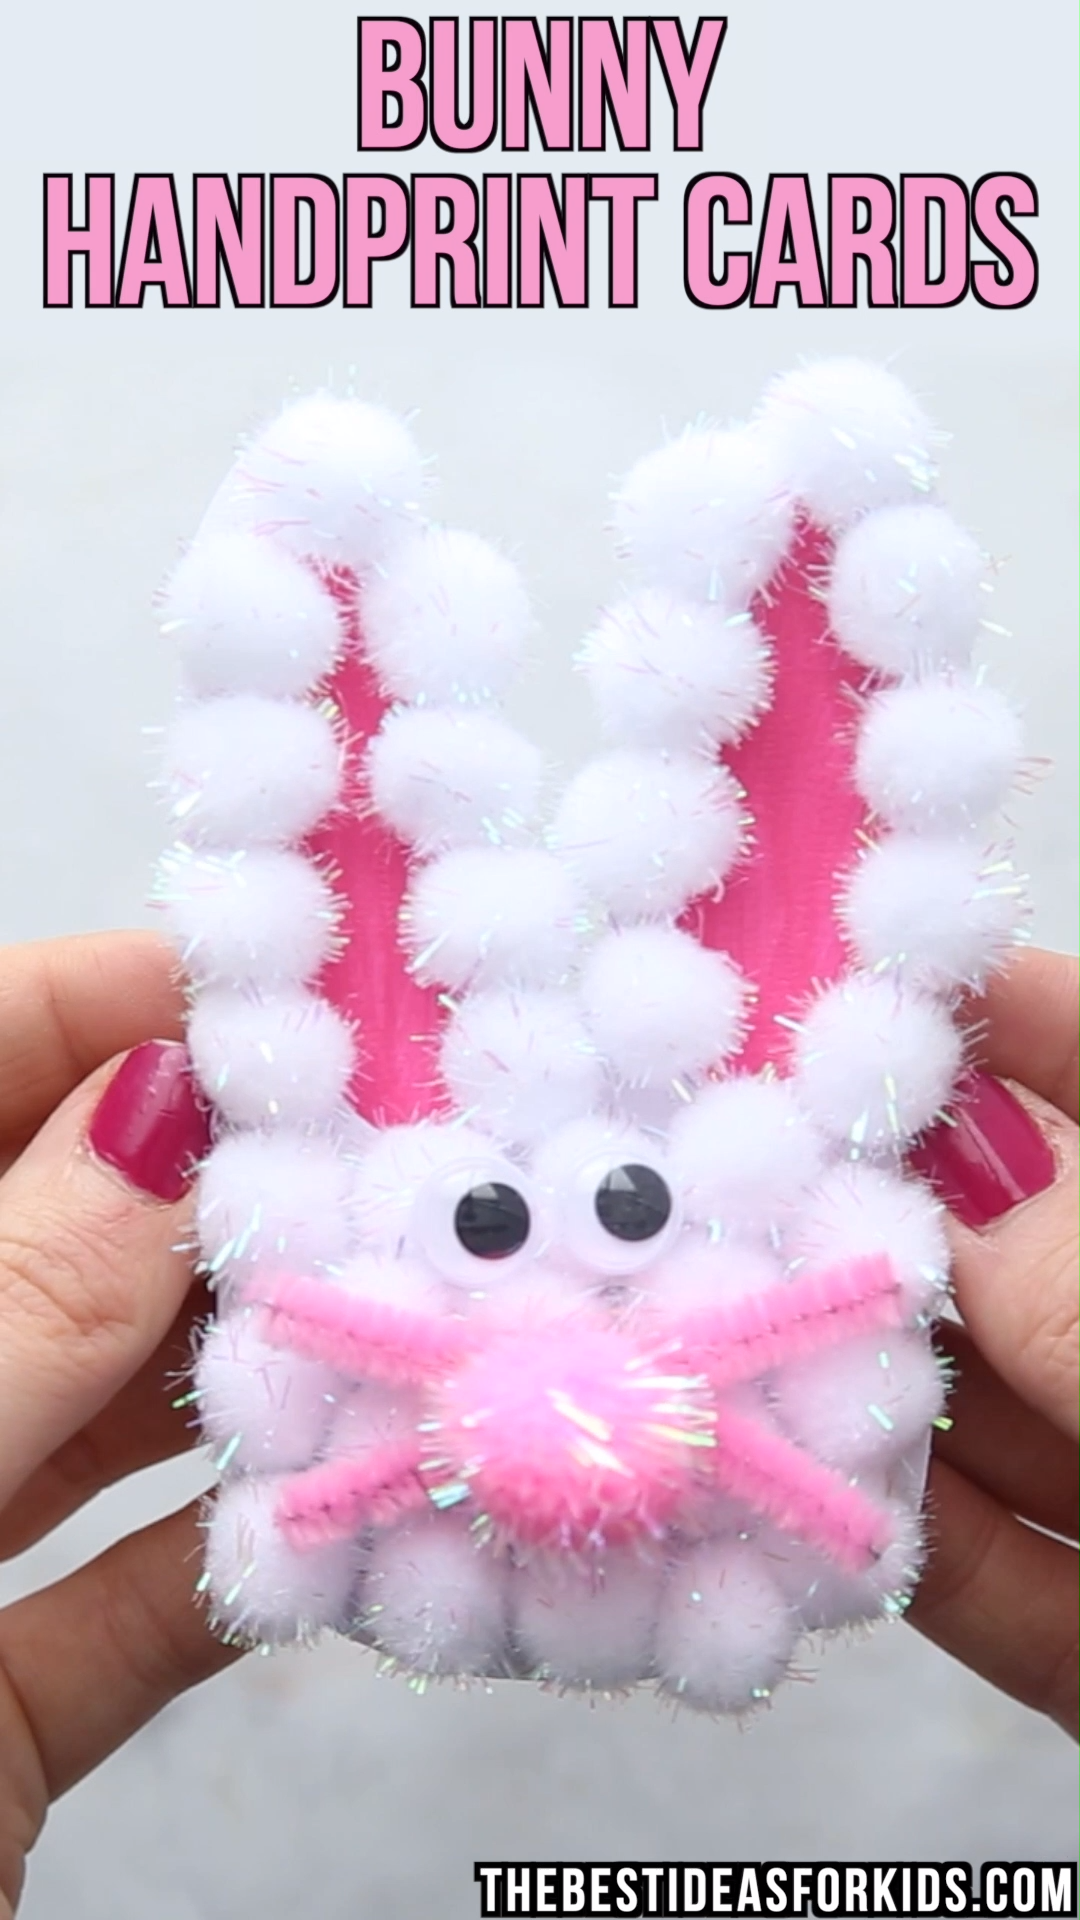 BUNNY HANDPRINT CARDS -   18 fabric crafts For Kids to make ideas